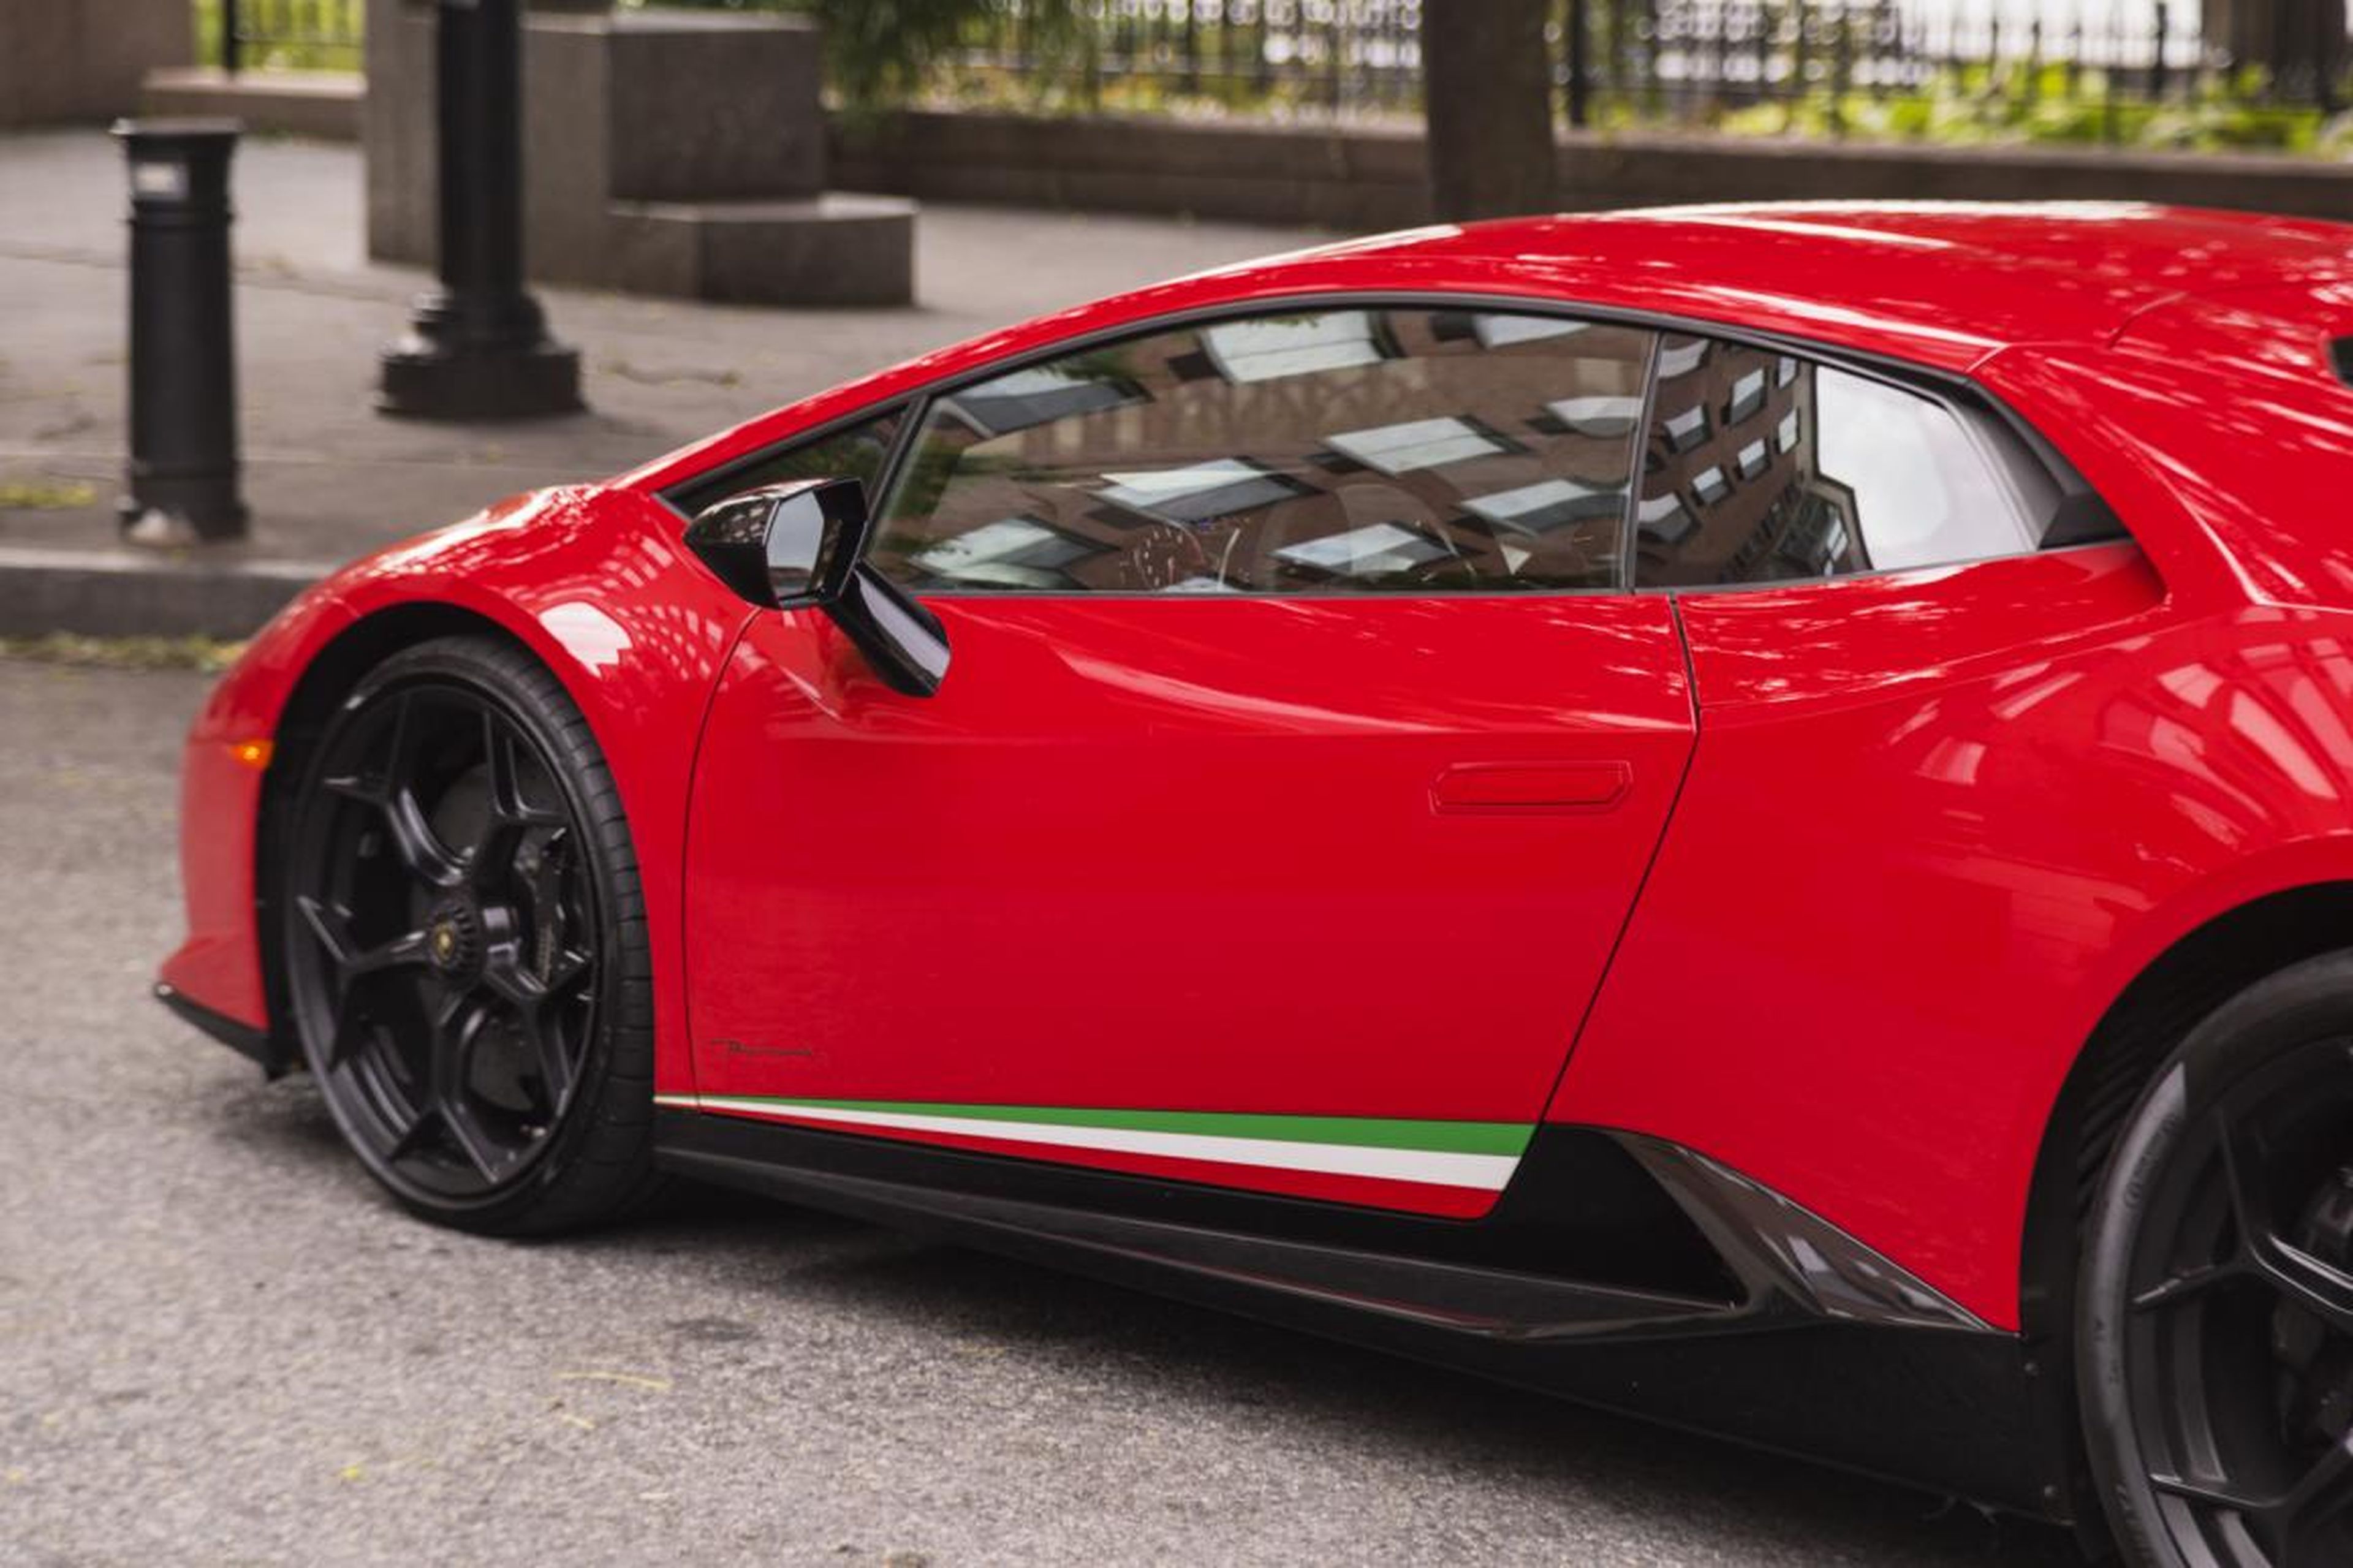 The Italian-colors detail is flamboyant, and for me, maybe overkill. But it's certainly fun, and this Lambo does hail from Bologna. Our tester started at about $274,000. A few extras took that to over $320,000. For example, a